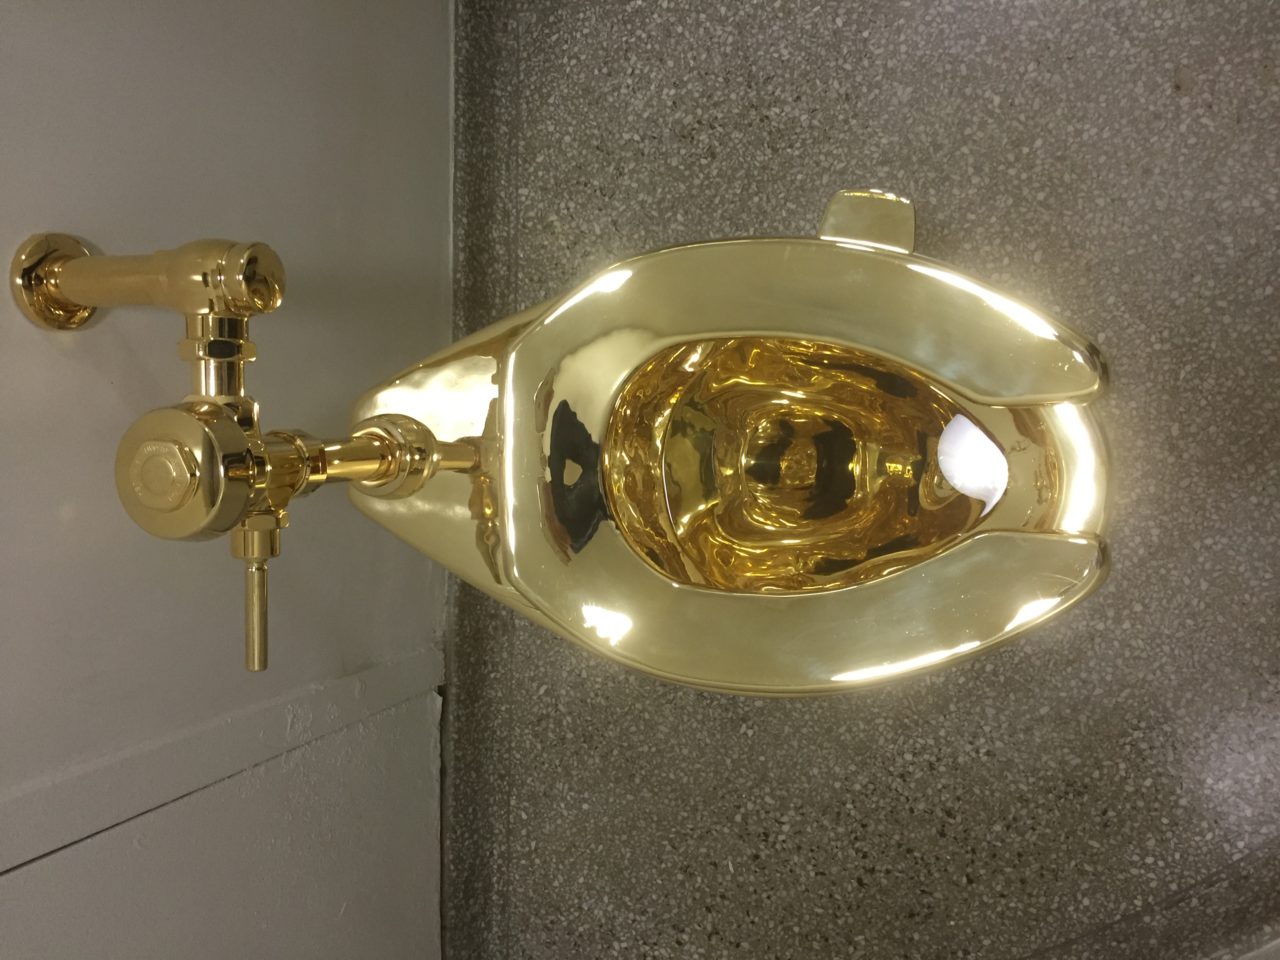 Loo-uis Vuitton golden toilet by Illma Gore is up for sale at